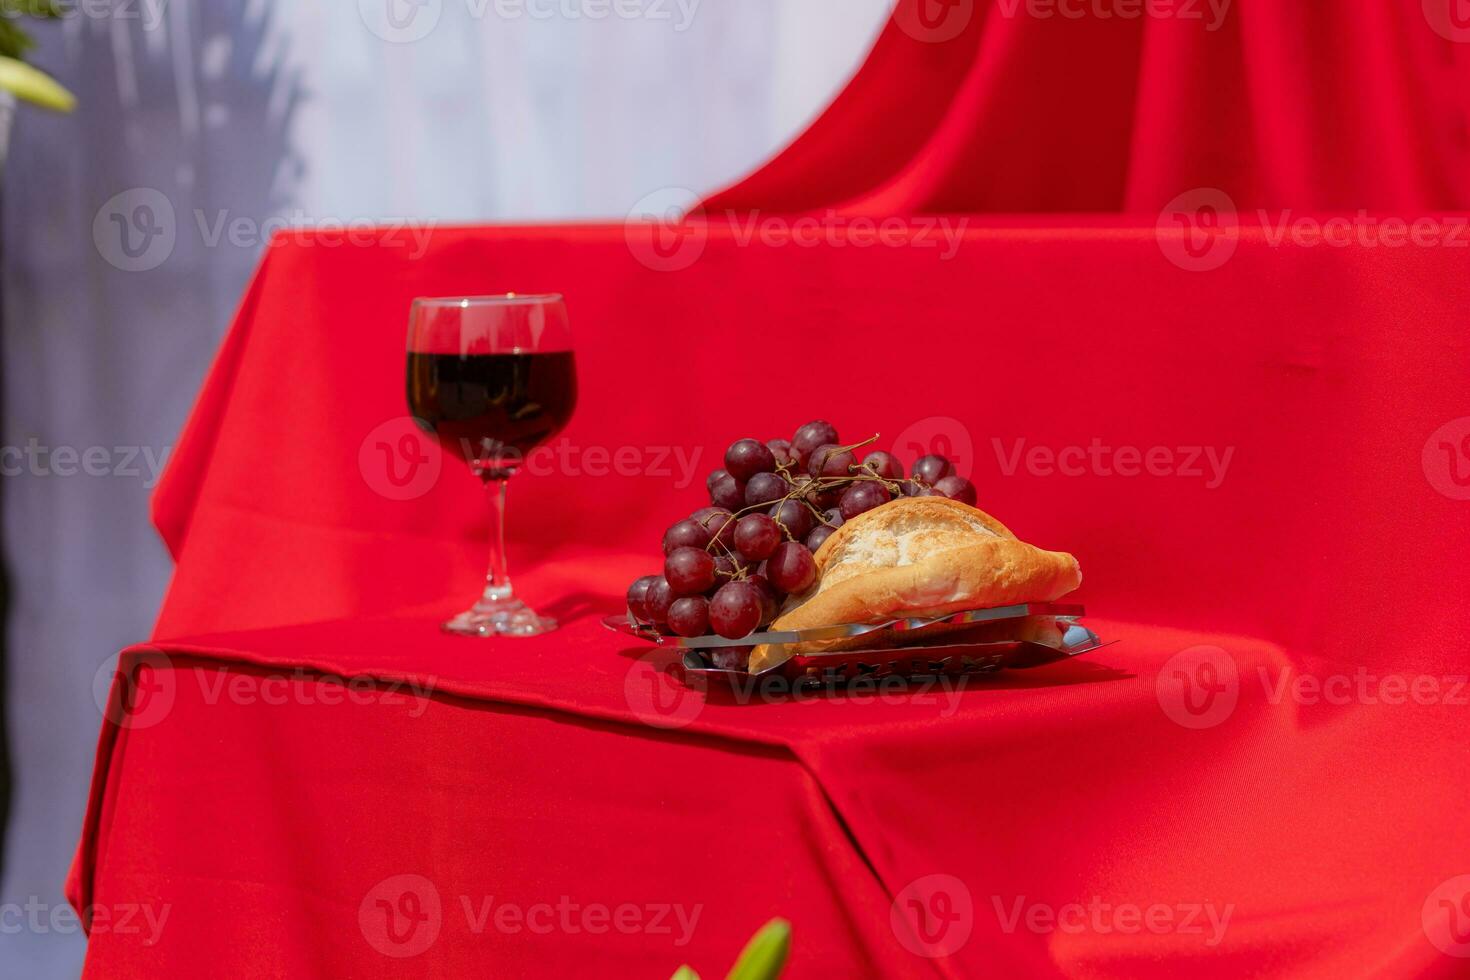 Elements of the last supper of Jesus bread, grapes and wine on a red cloth with harsh lighting photo